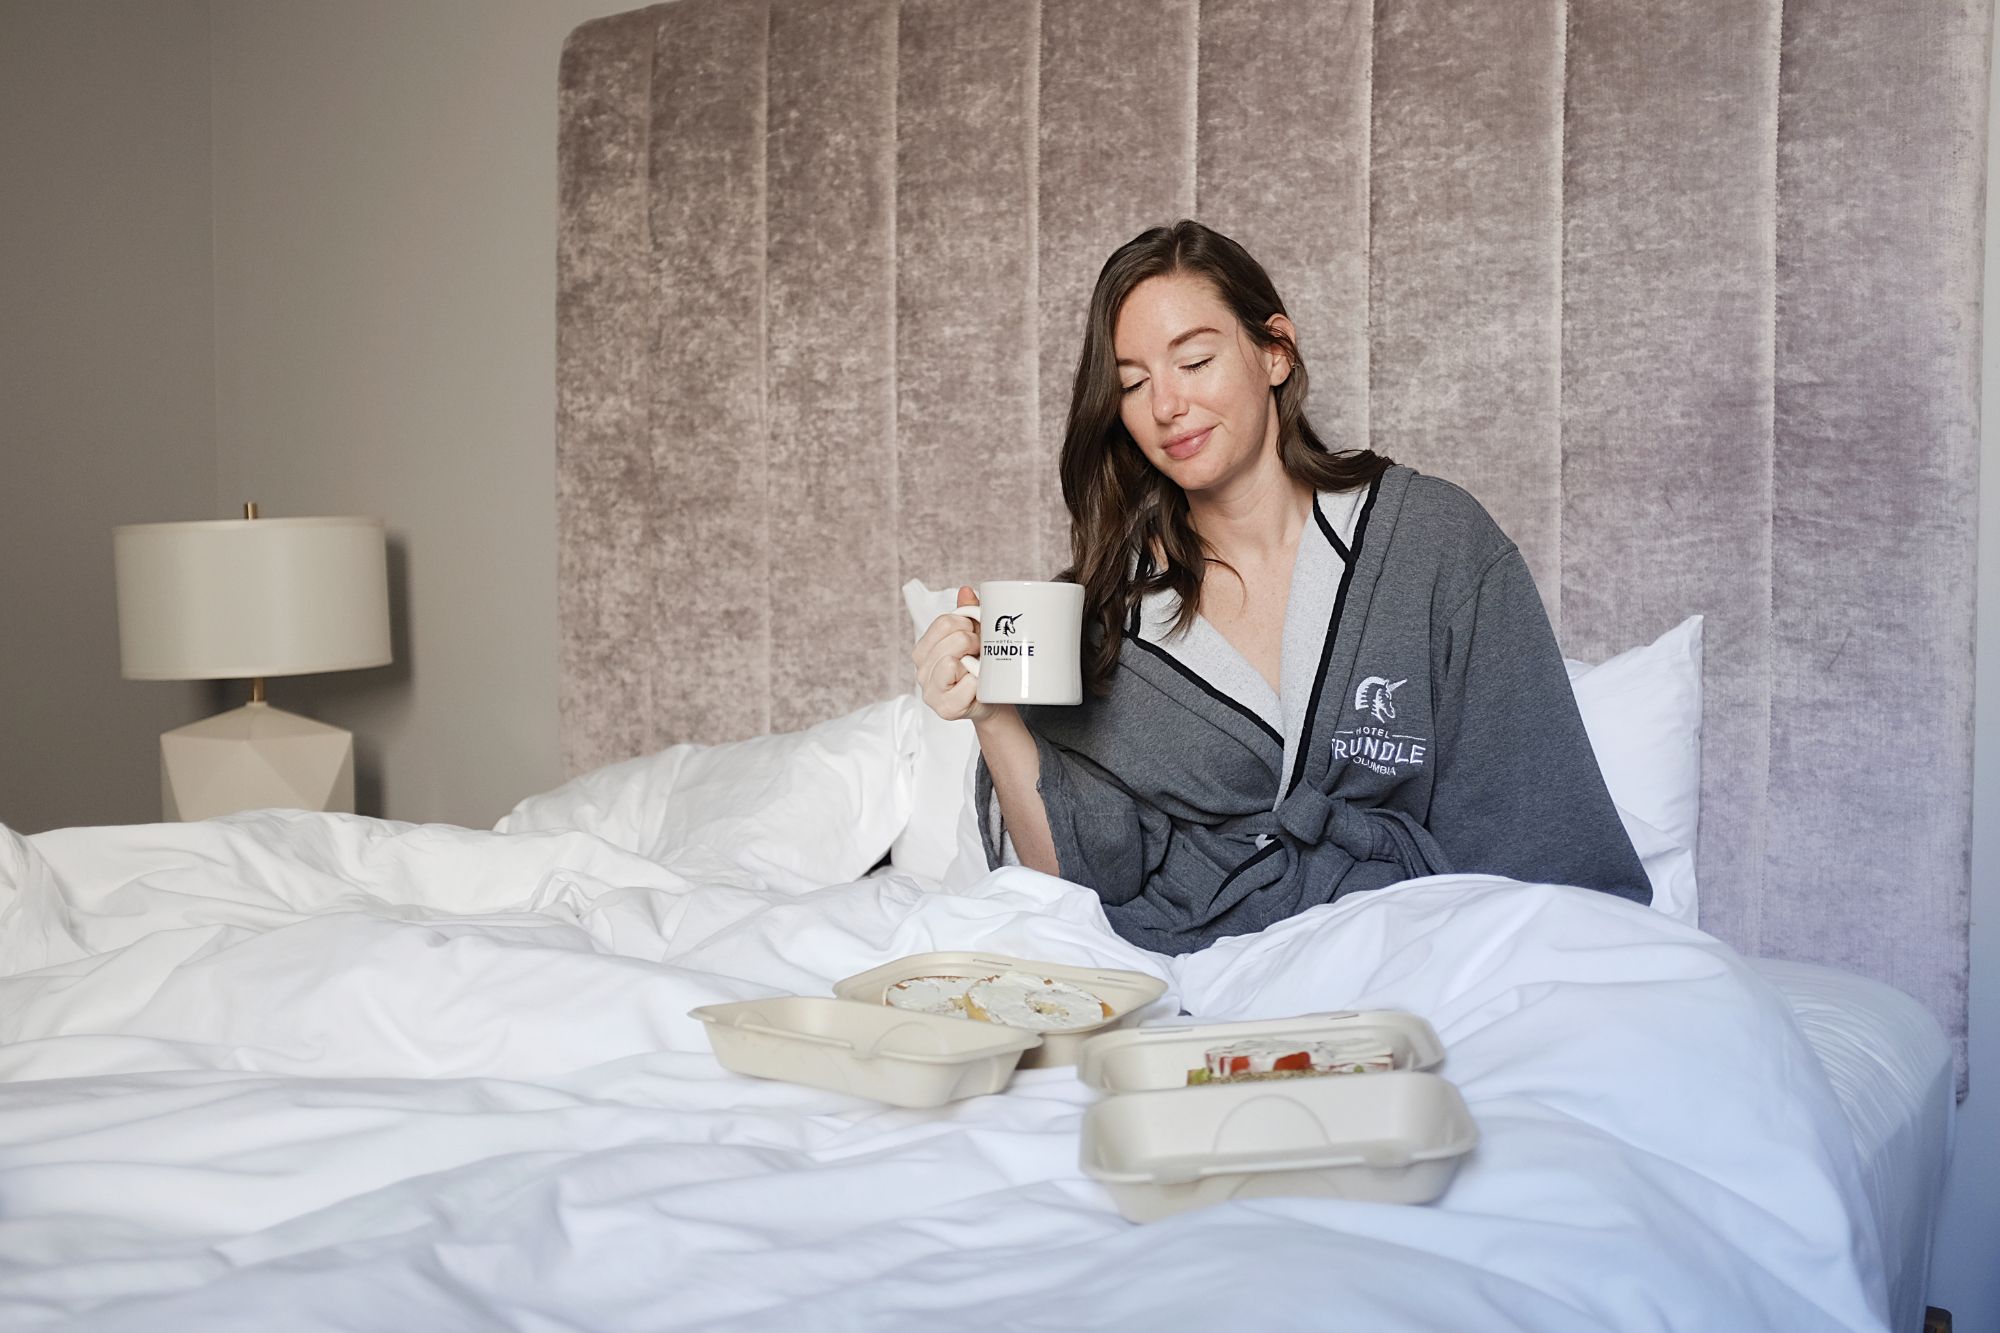 Alyssa sits in bed at the Hotel Trundle with coffee and breakfast